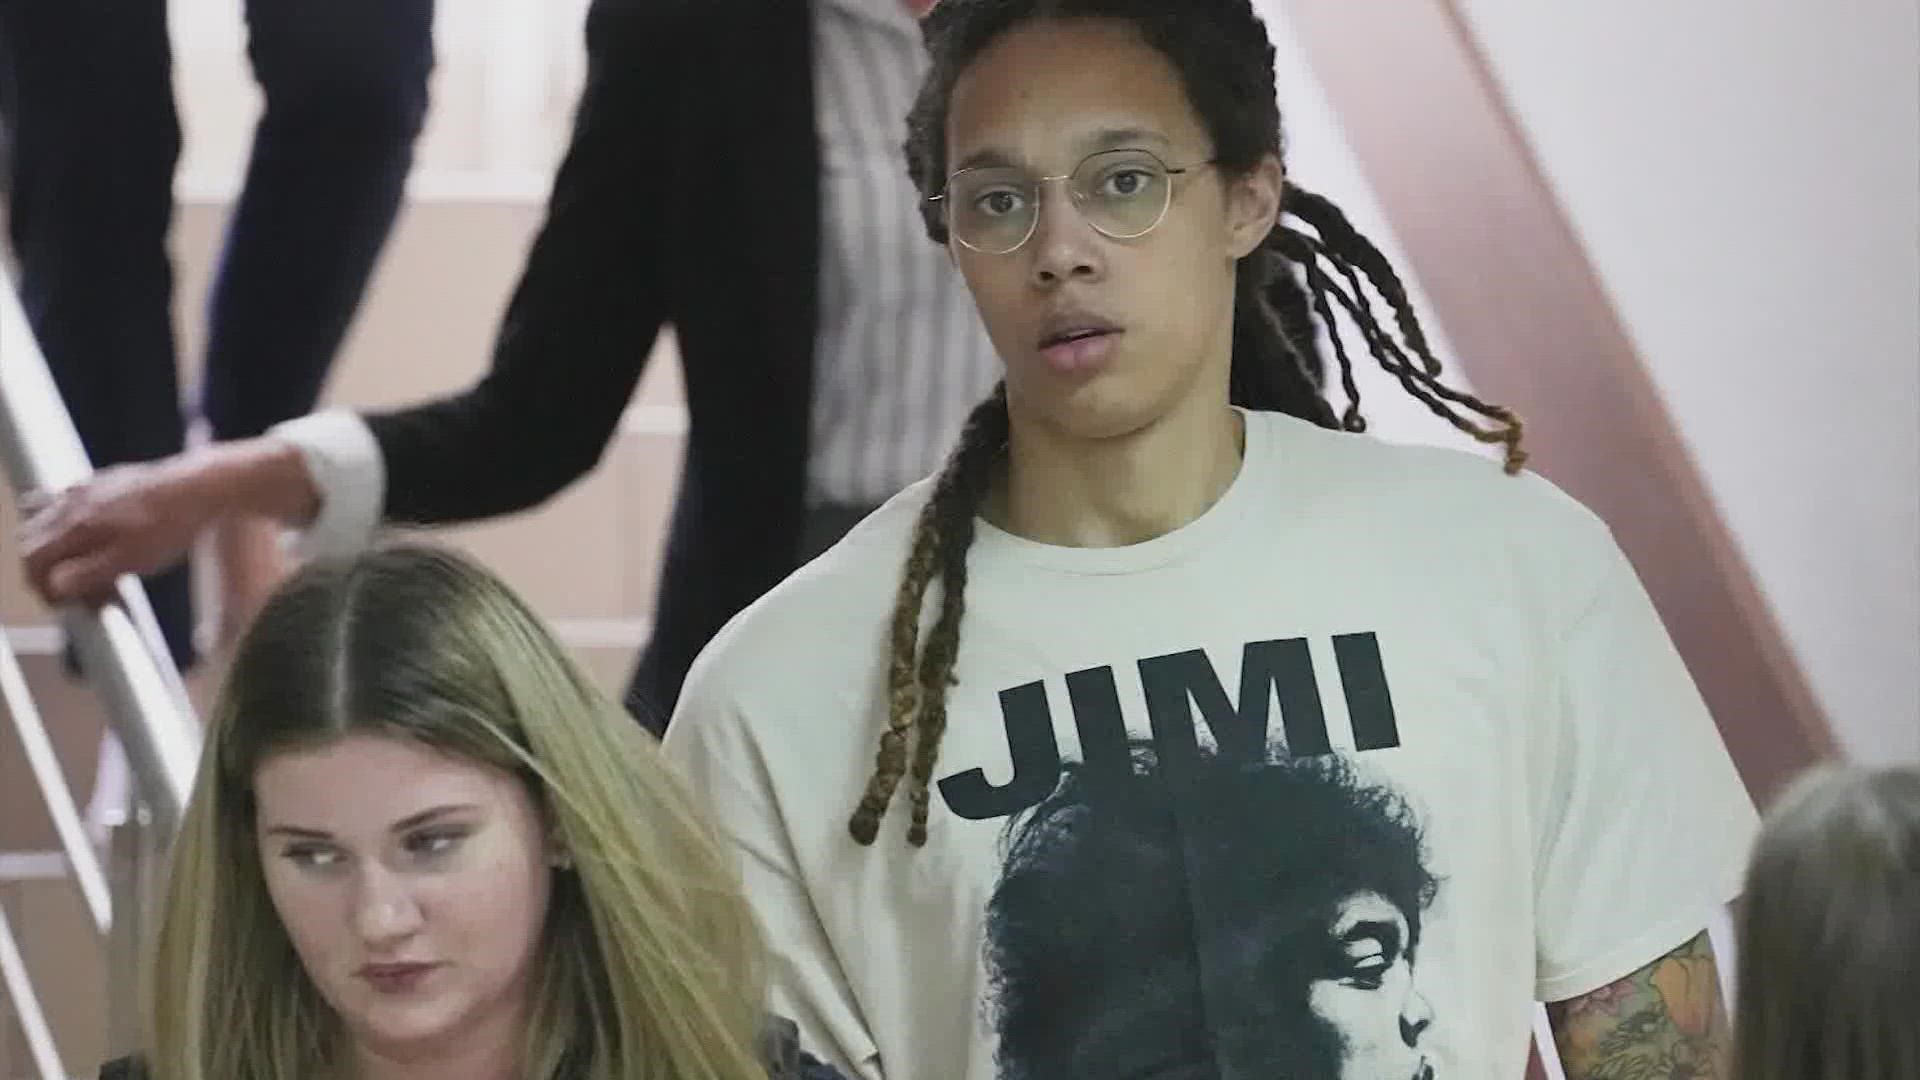 Brittney Griner's wife, Cherelle, also told CBS Mornings that it's "very disheartening" that she has not heard from President Biden yet.